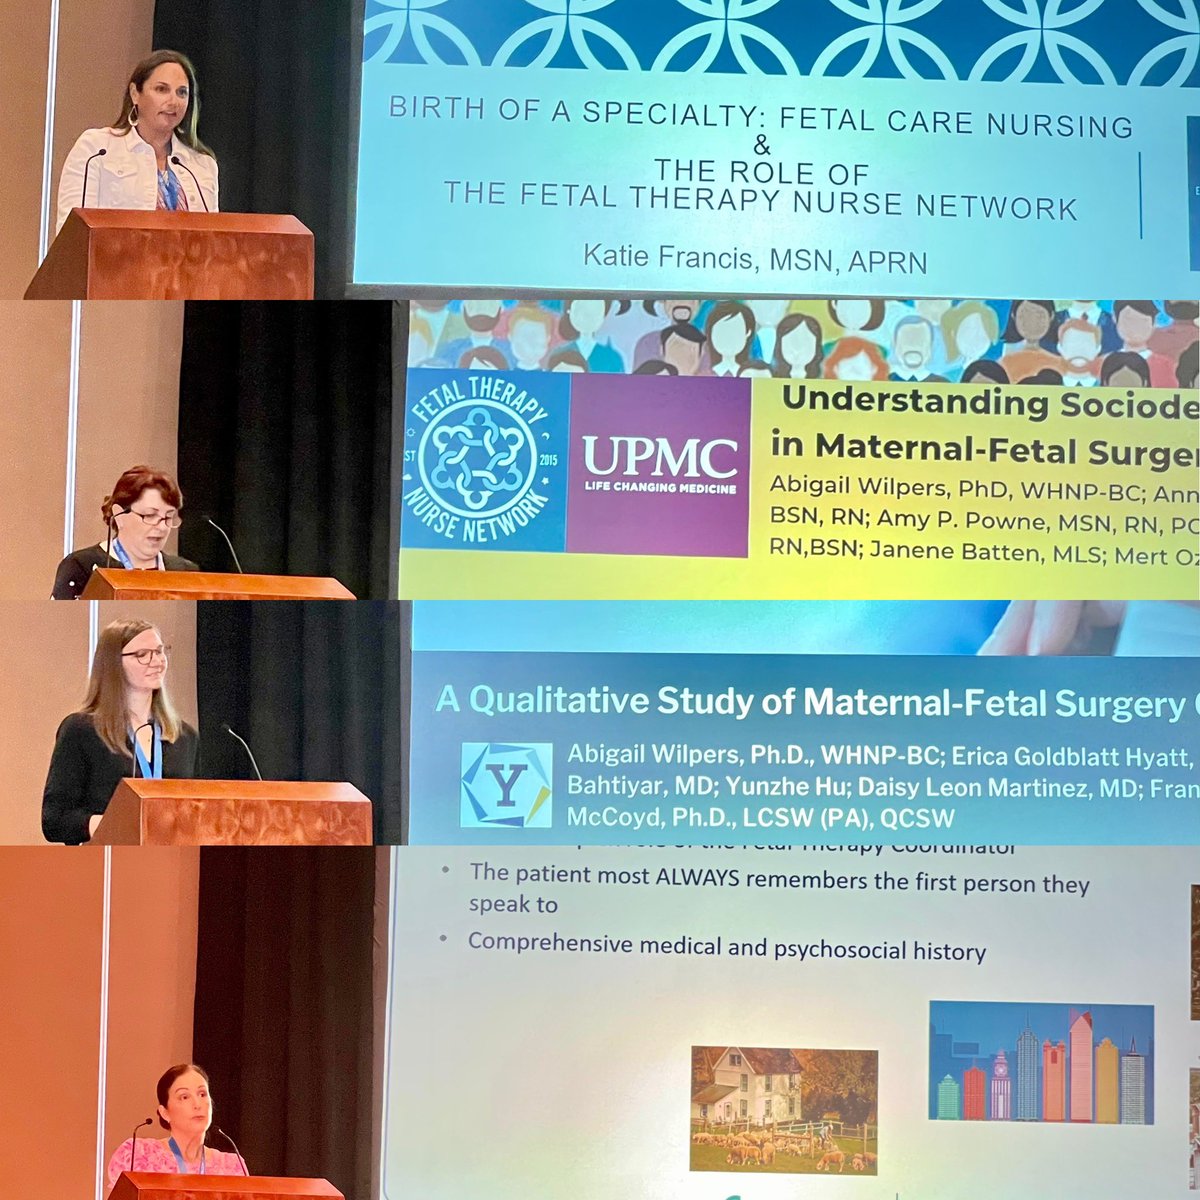 THANK YOU @IFMSS2022 for emphasizing the WHOLE care of pregnant people and families by starting the conference with research from @nursefetal and clinicians focused on #maternalmentalhealth, #healthequity, #interprofessional practice and #fetaltherapy counseling. 1/2